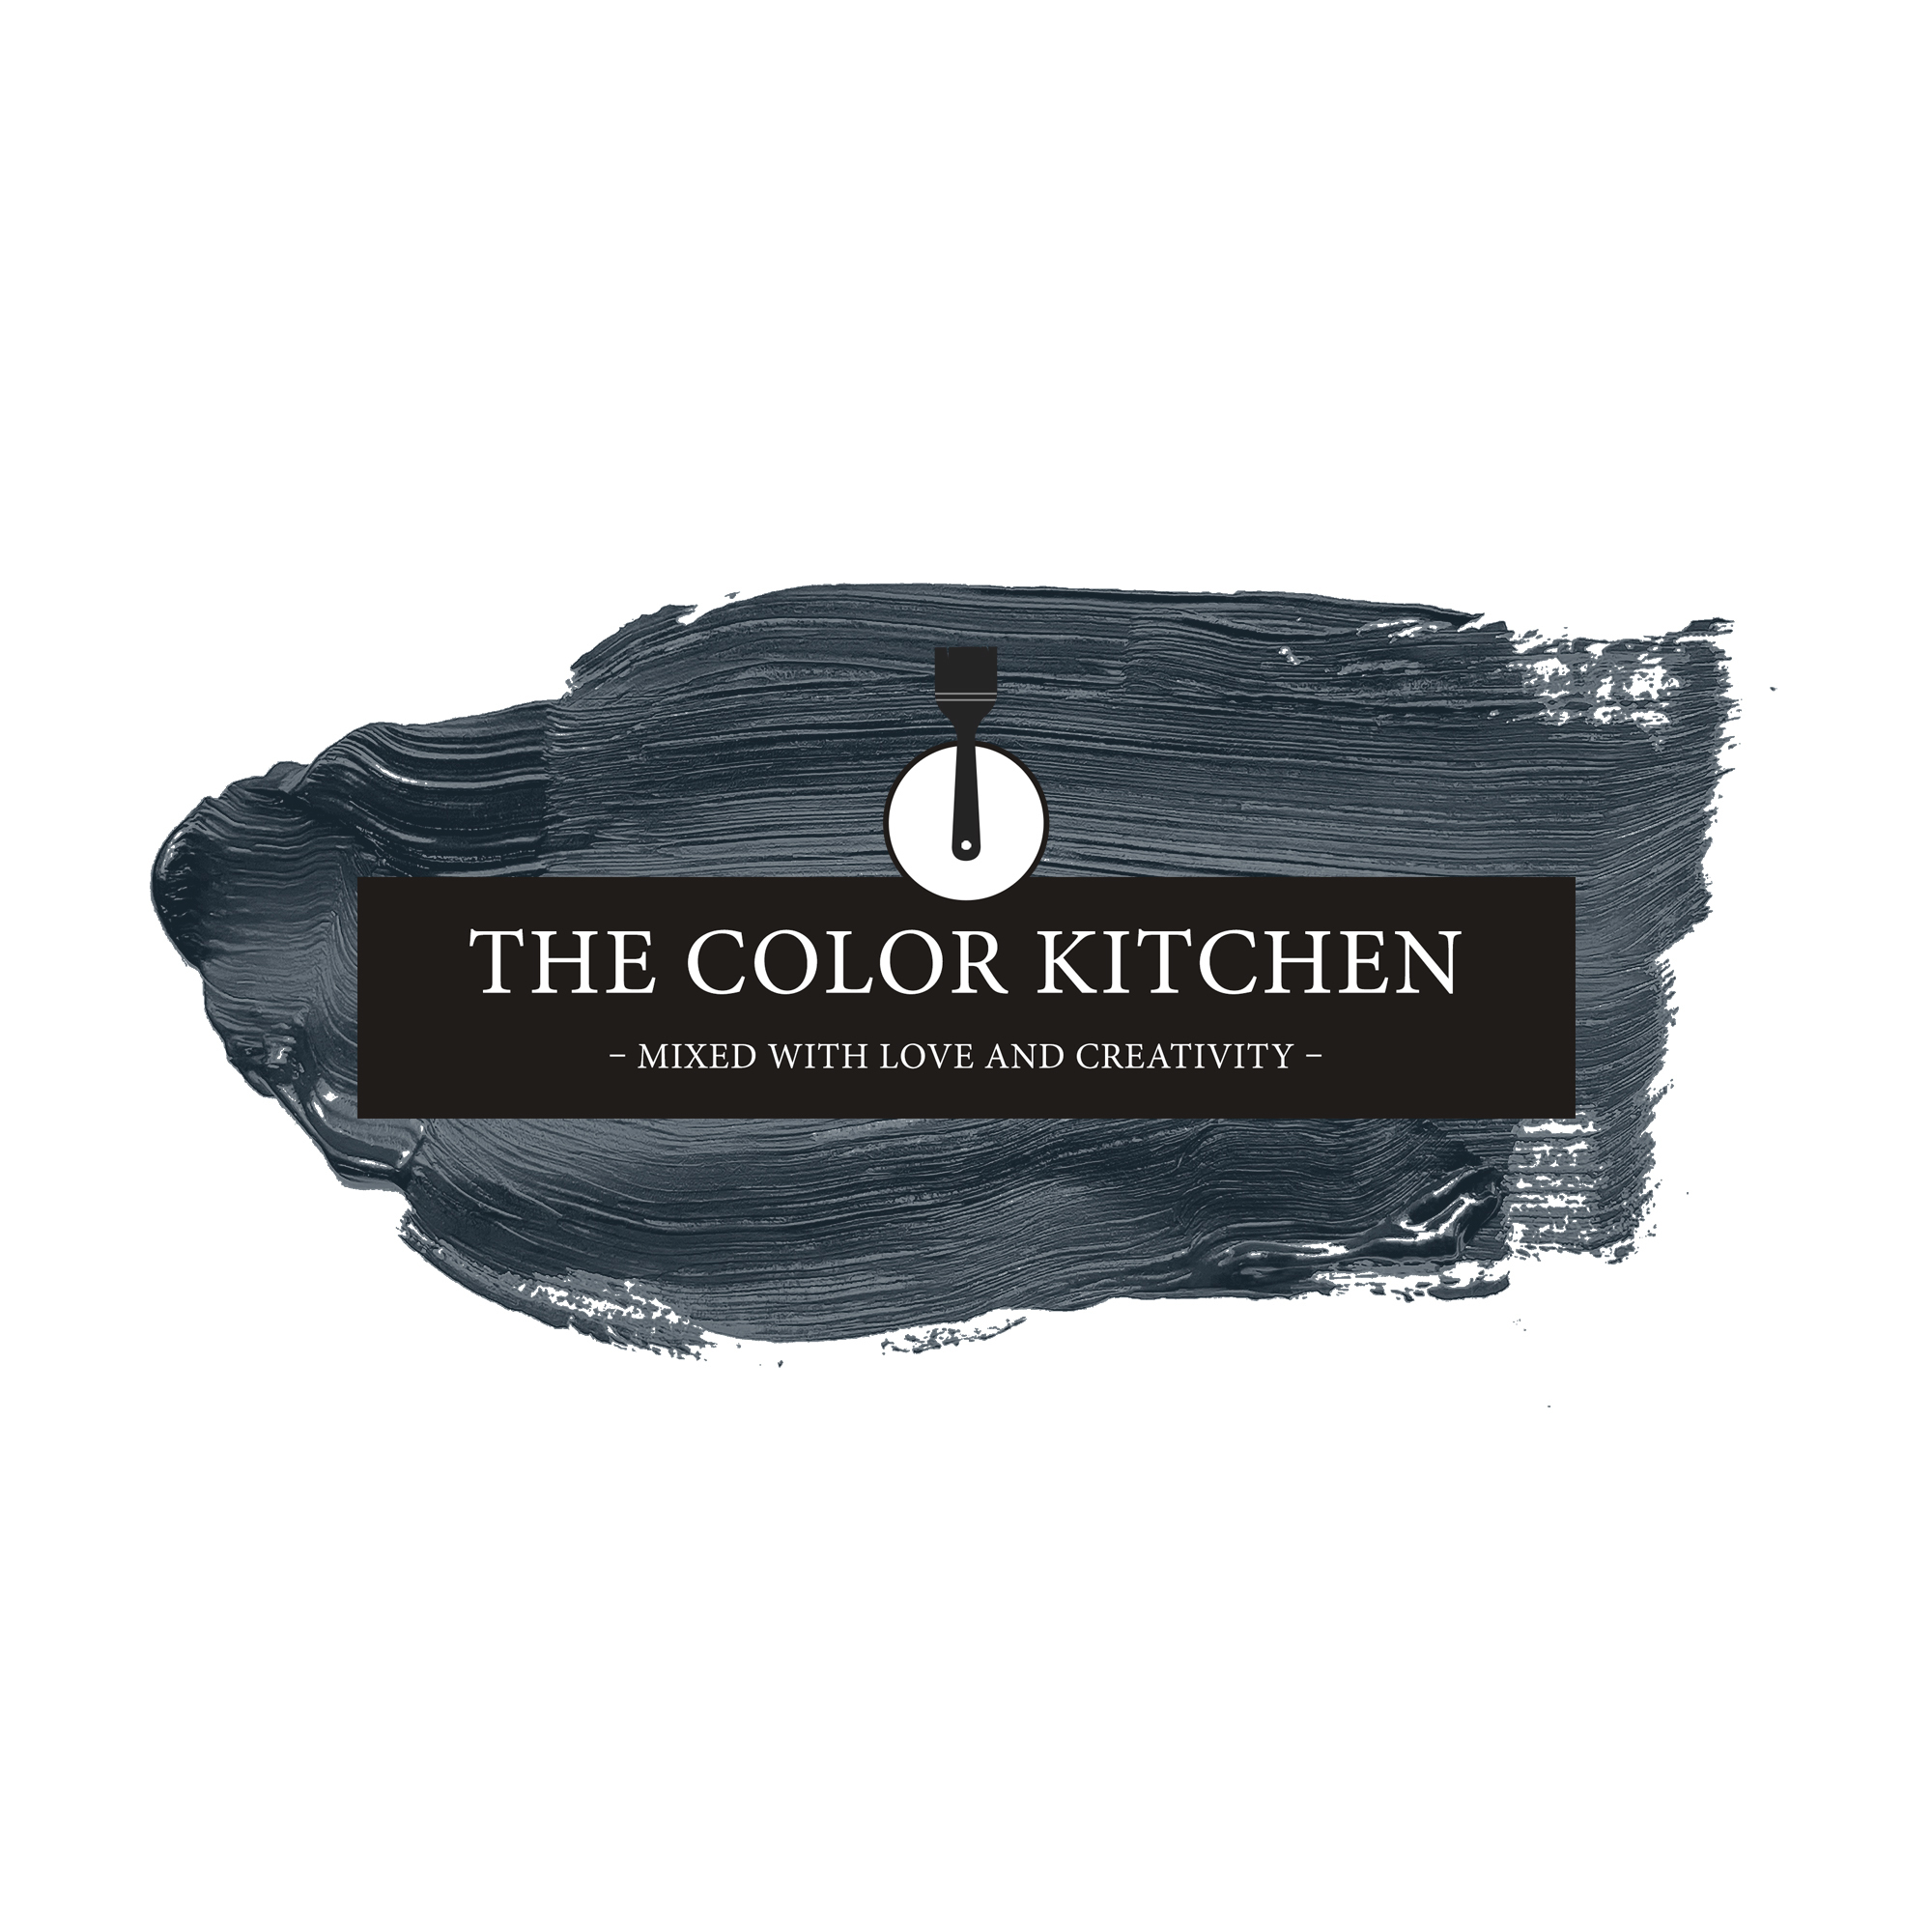 The Color Kitchen Blooming Blueberry 5 l